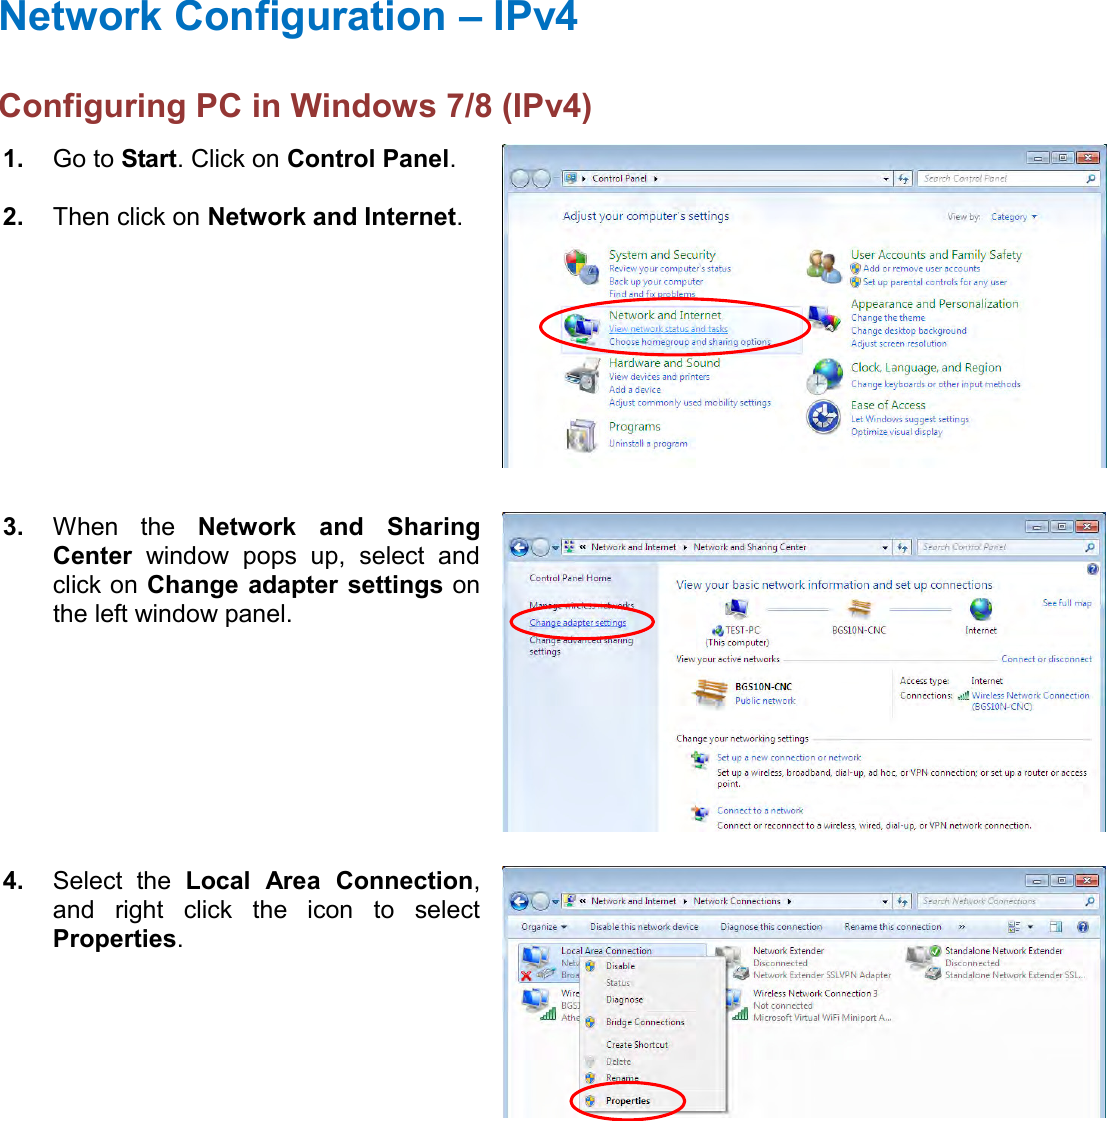    Network Configuration – IPv4 Configuring PC in Windows 7/8 (IPv4)  1. Go to Start. Click on Control Panel.  2. Then click on Network and Internet.  3. When  the  Network  and  Sharing Center  window  pops  up,  select  and click on Change  adapter settings on the left window panel.  4. Select  the  Local  Area  Connection, and  right  click  the  icon  to  select Properties.  